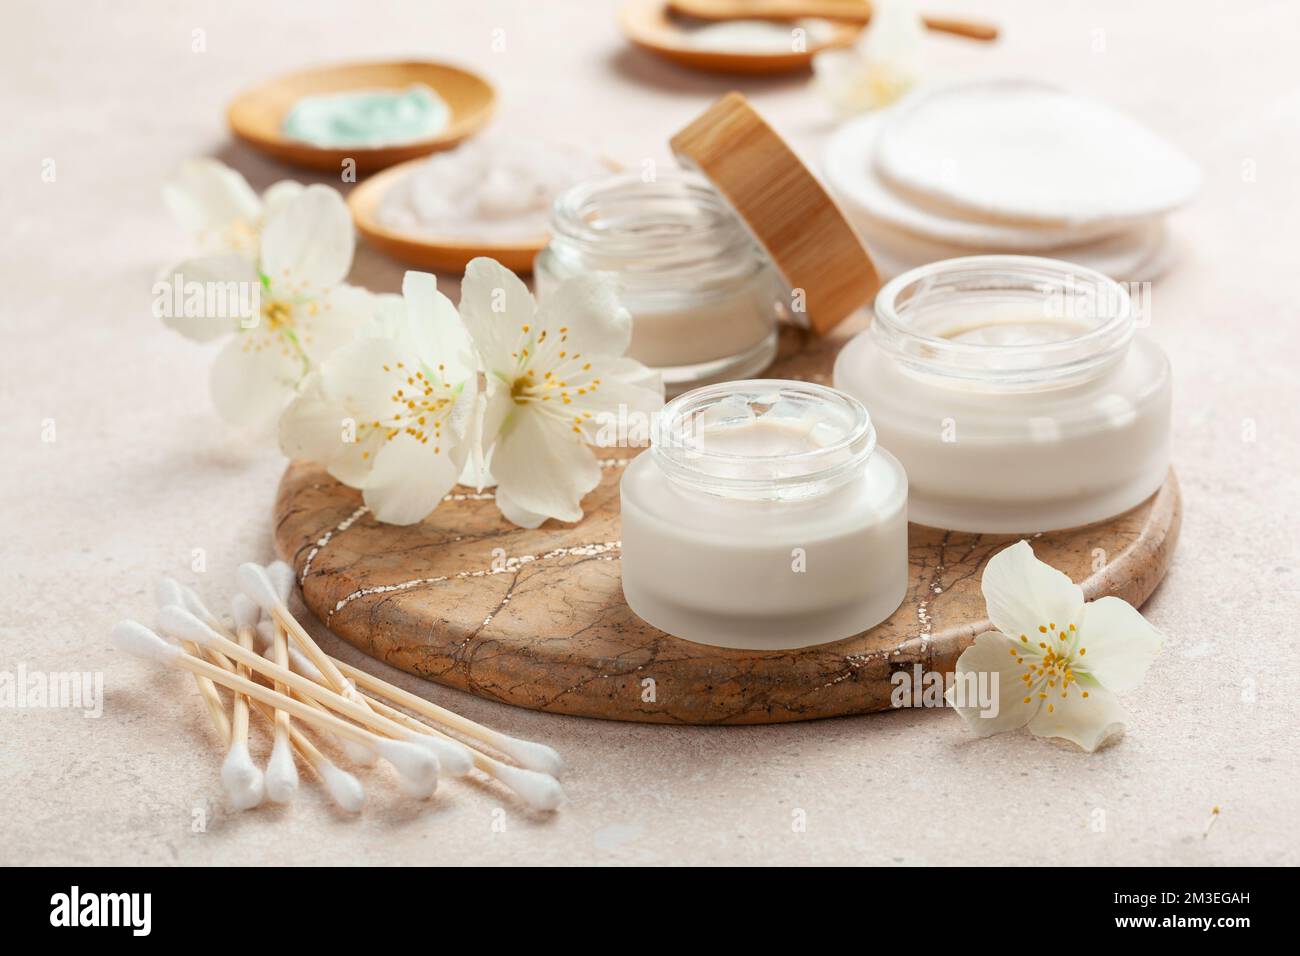 skincare products and jasmine flowers. zero waste eco friendly natural cosmetics for home spa Stock Photo